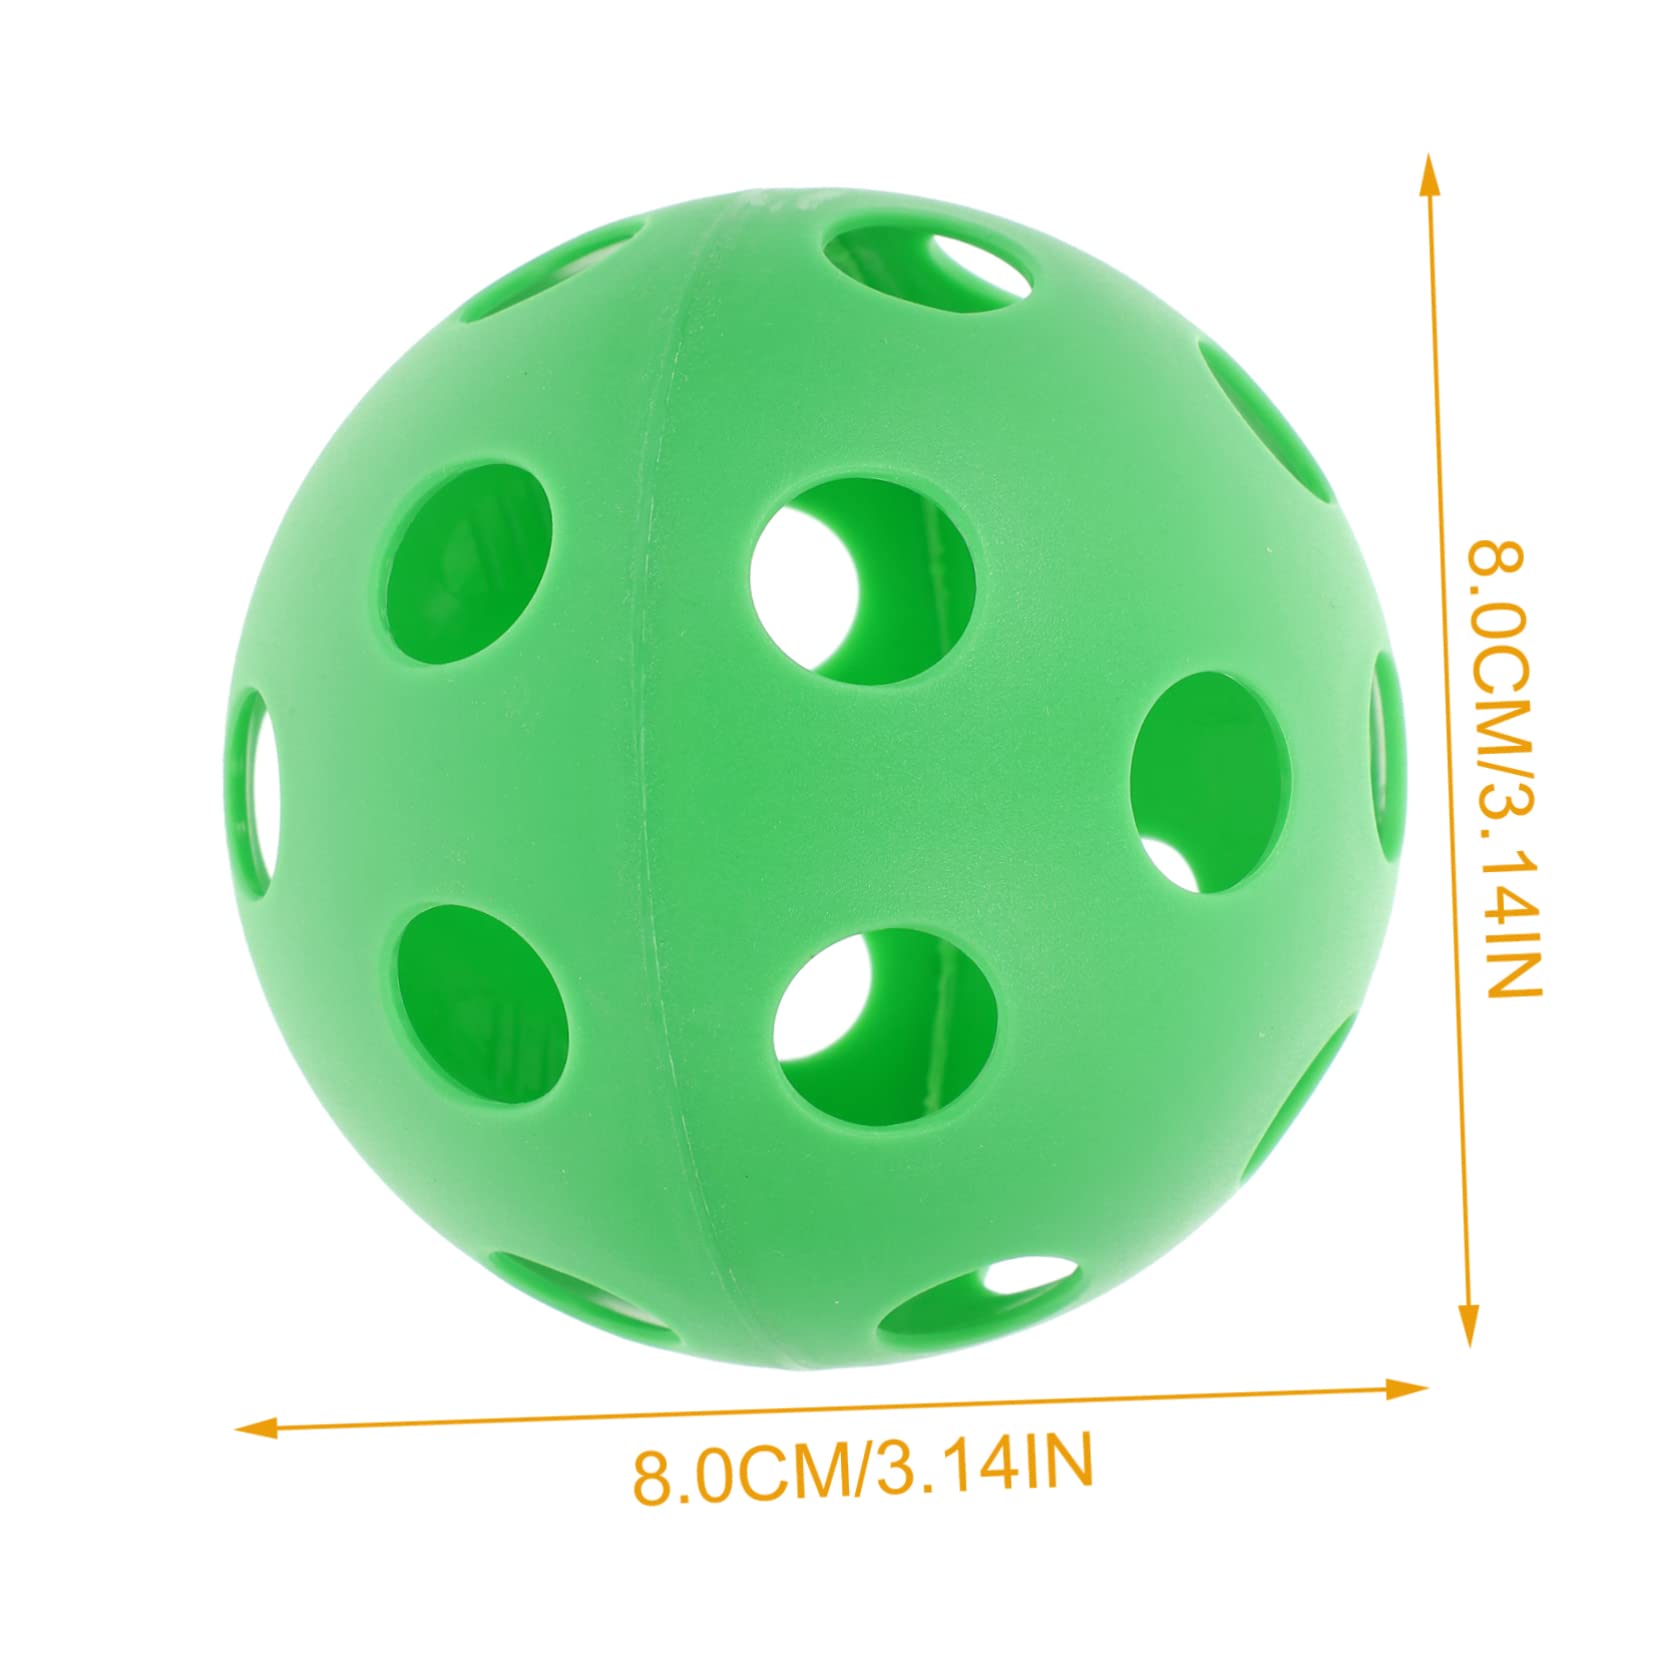 ERINGOGO 1 String Children's Hand Ball Puppies Toys for -Resistant Children Toy Puppy Toys for Kids Cat Ball Toy Outside Toys Puppy Dog Toys Plastic Household Baby Practice Ball